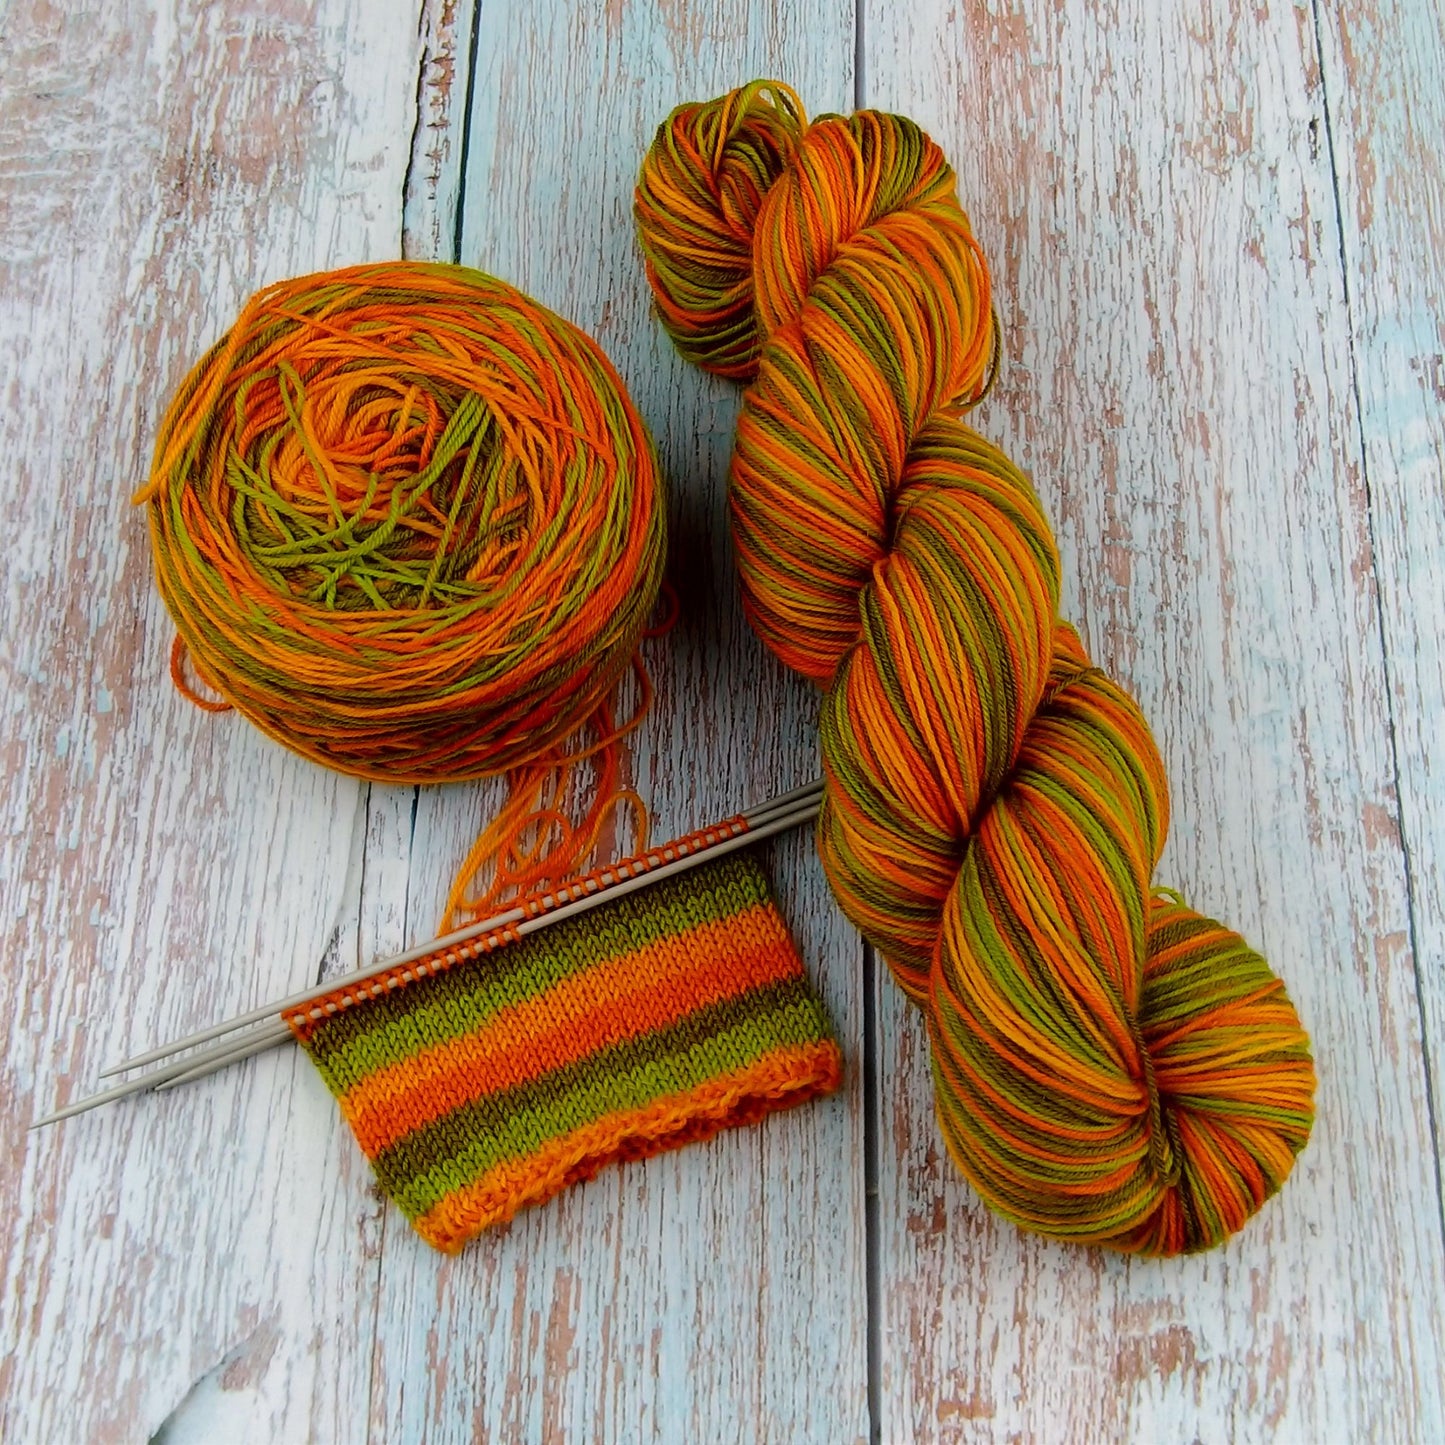 I don't want Summer to end -  Chickadee Fingering/Sock - Ready to ship